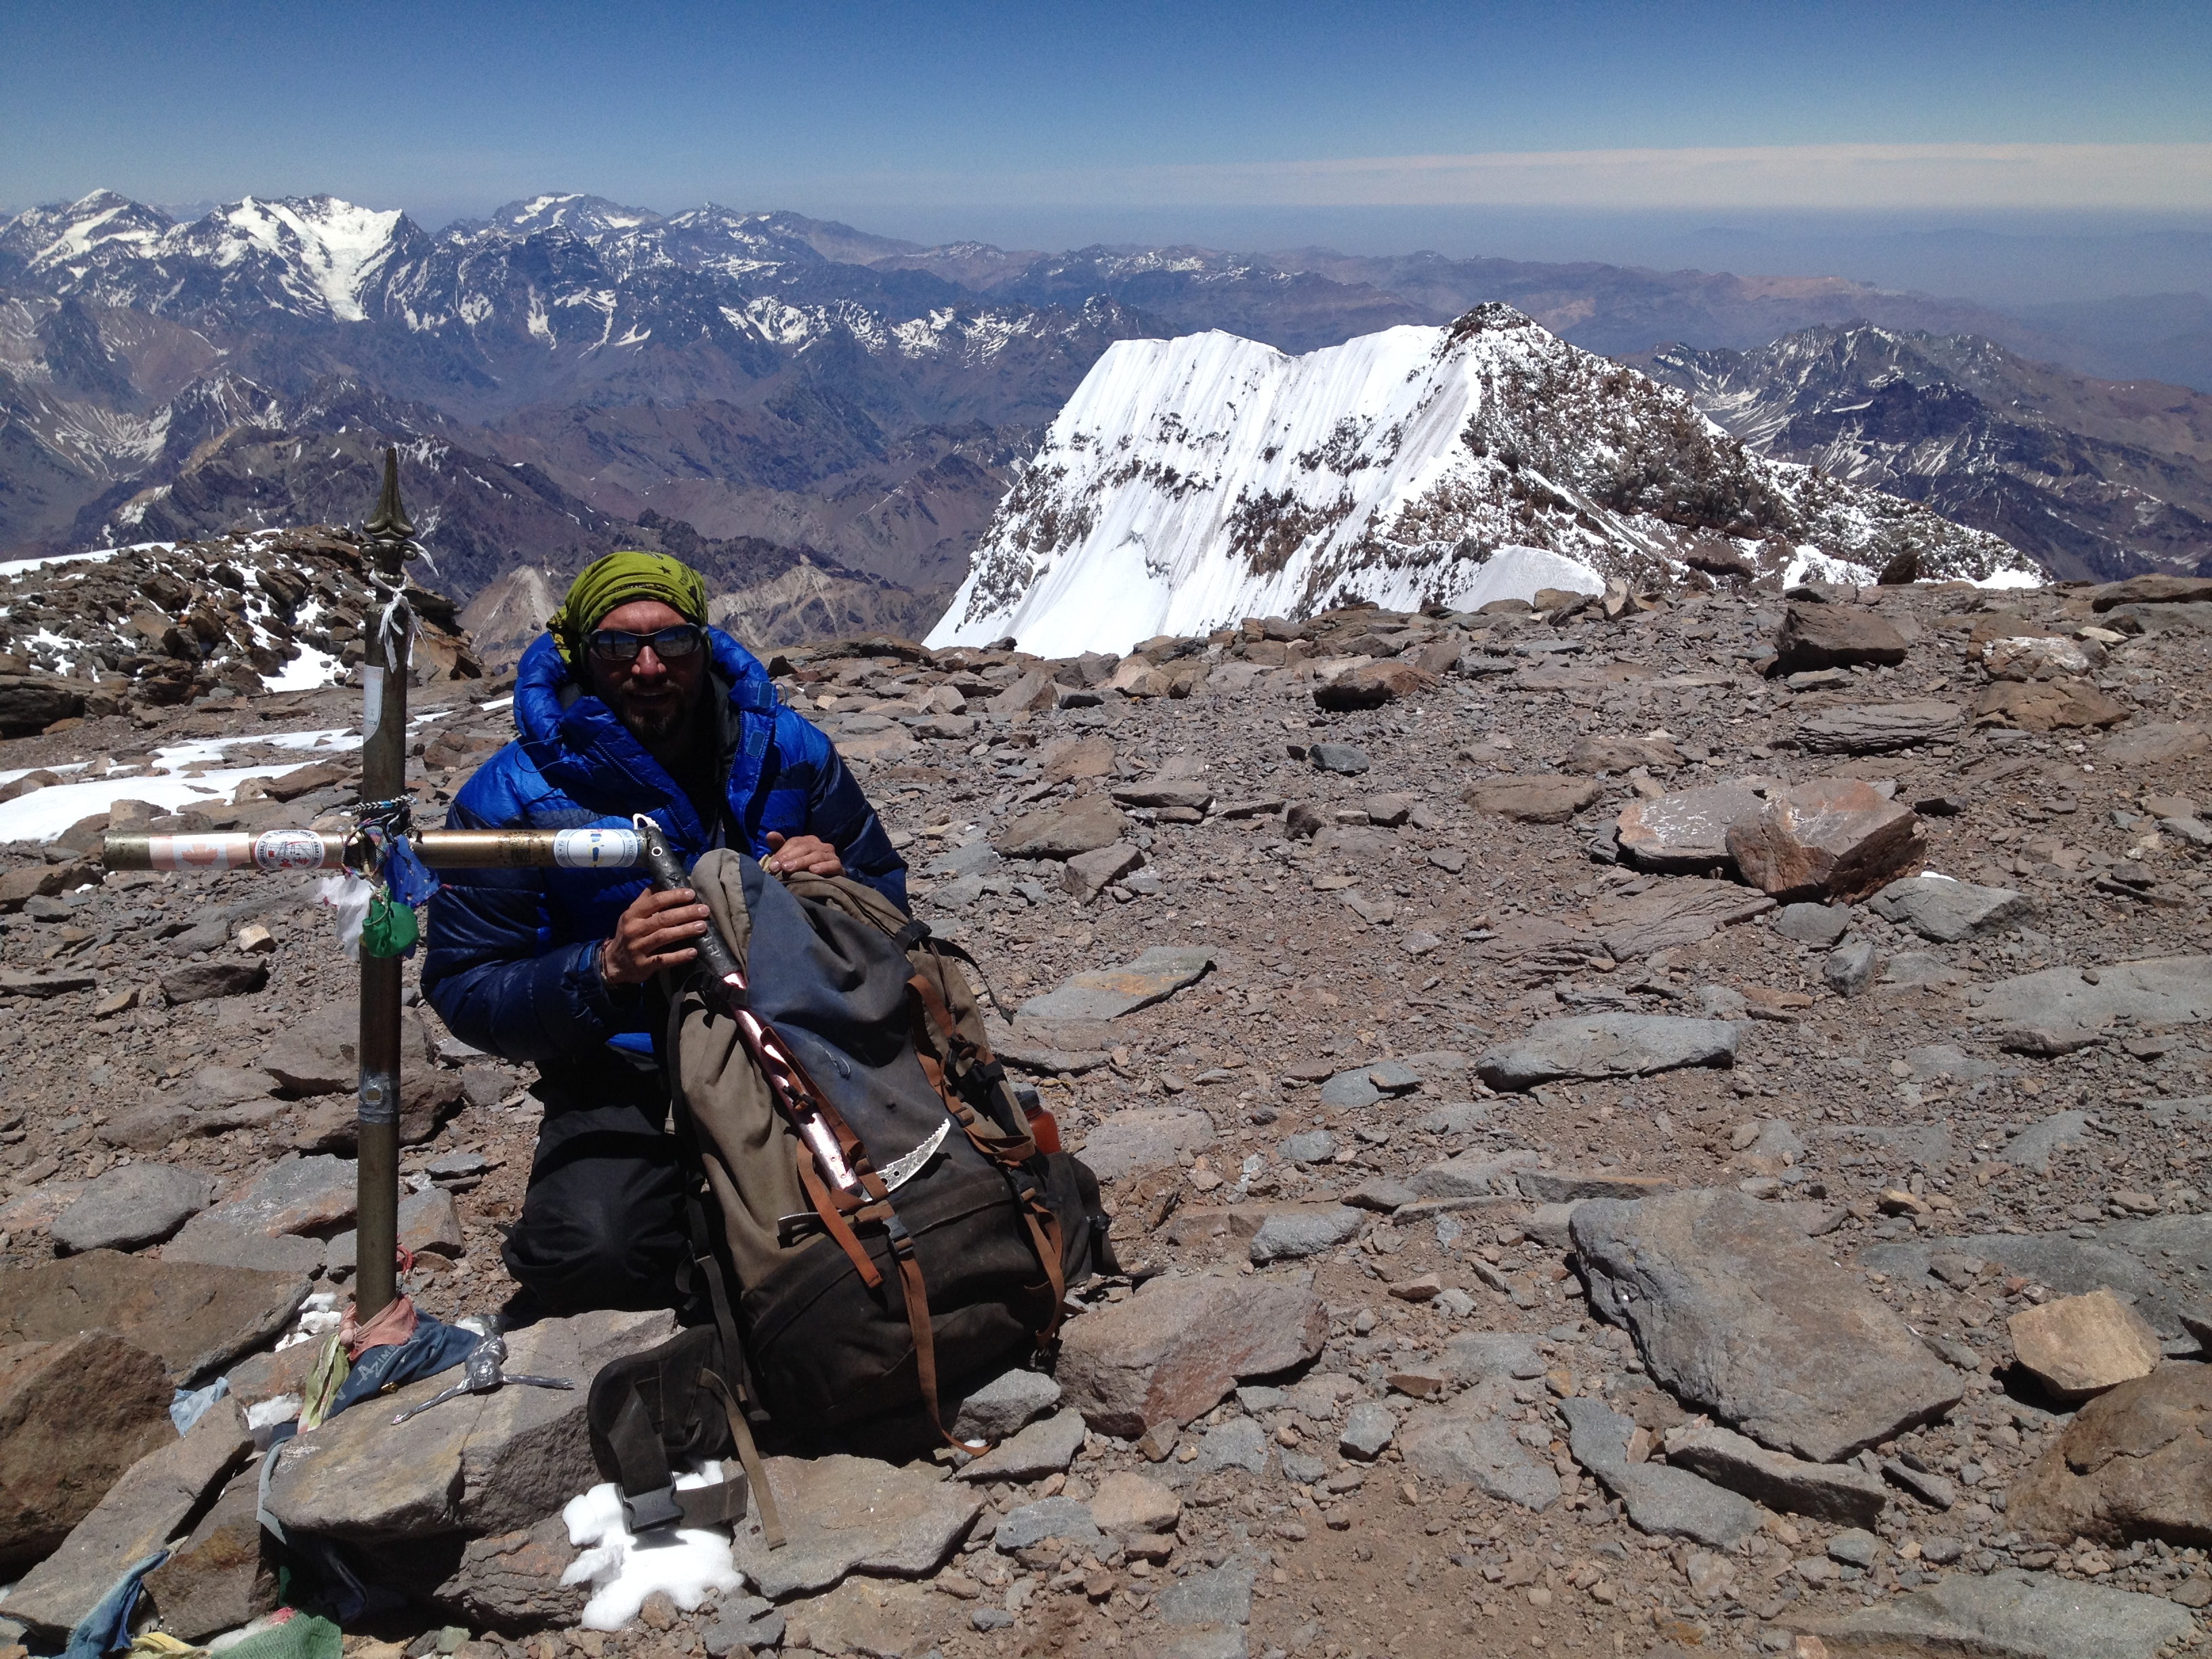 VIDEO – Interview to HME founder in Aconcagua